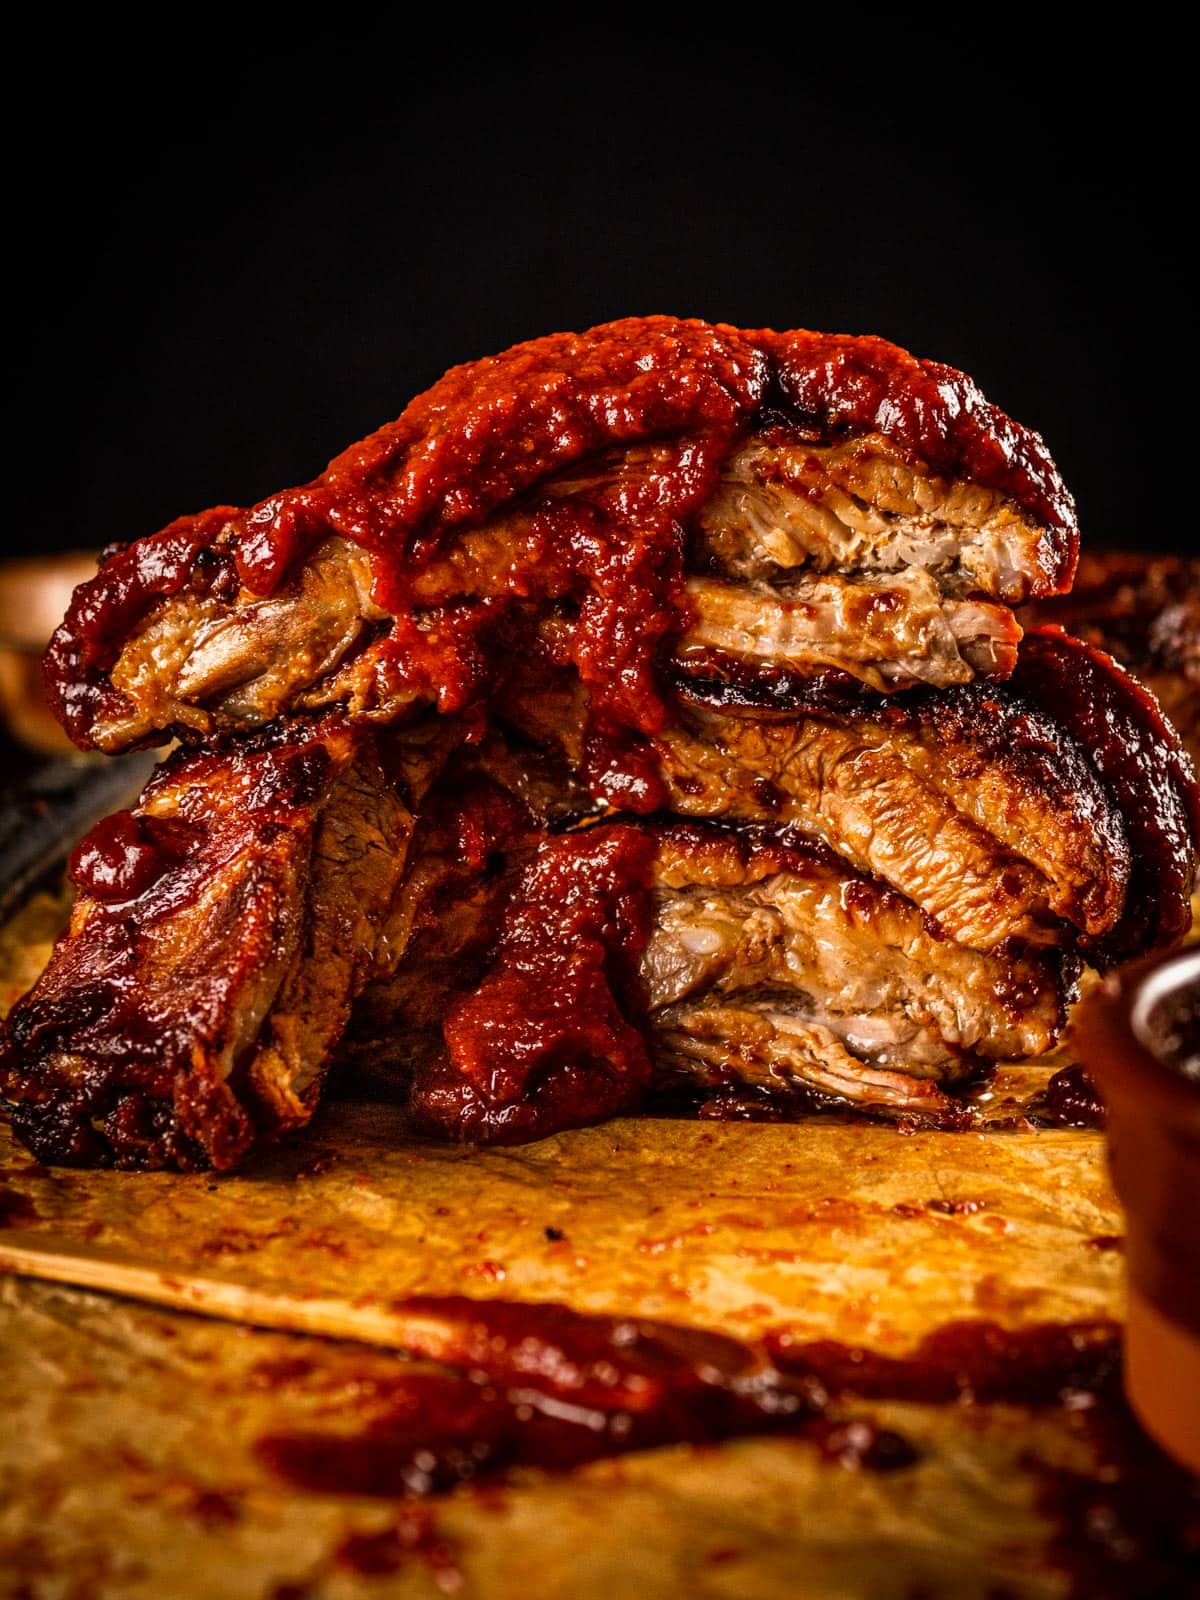 cut ribs stacked on each other with barbecue sauce dripping over the top of them.